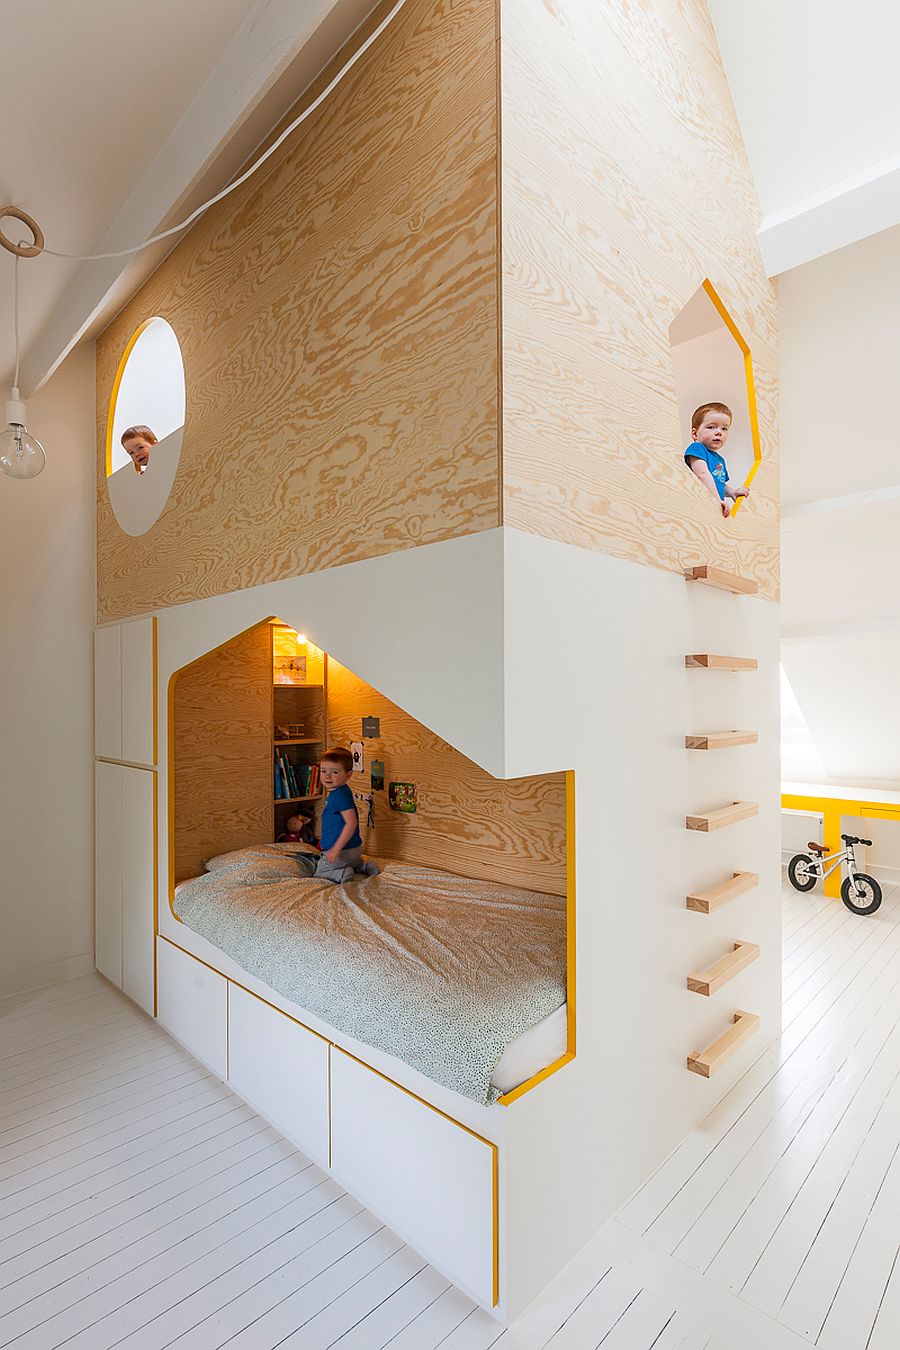 Bespoke-kids-bed-design-with-twin-beds-and-a-playspace